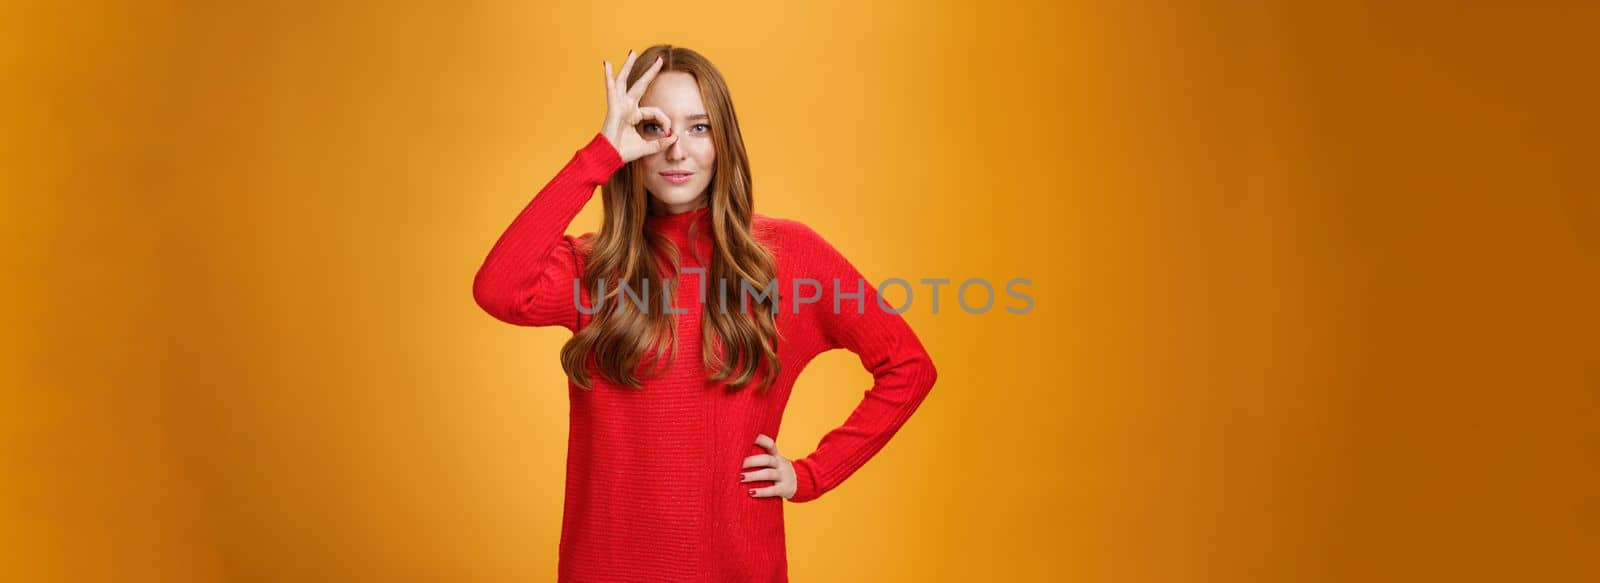 I got you on aim. Self-assured expressive and confident attractive redhead woman in red warm dress showing okay or zero sign on eye and peeking through as smiling satisfied over orange wall.